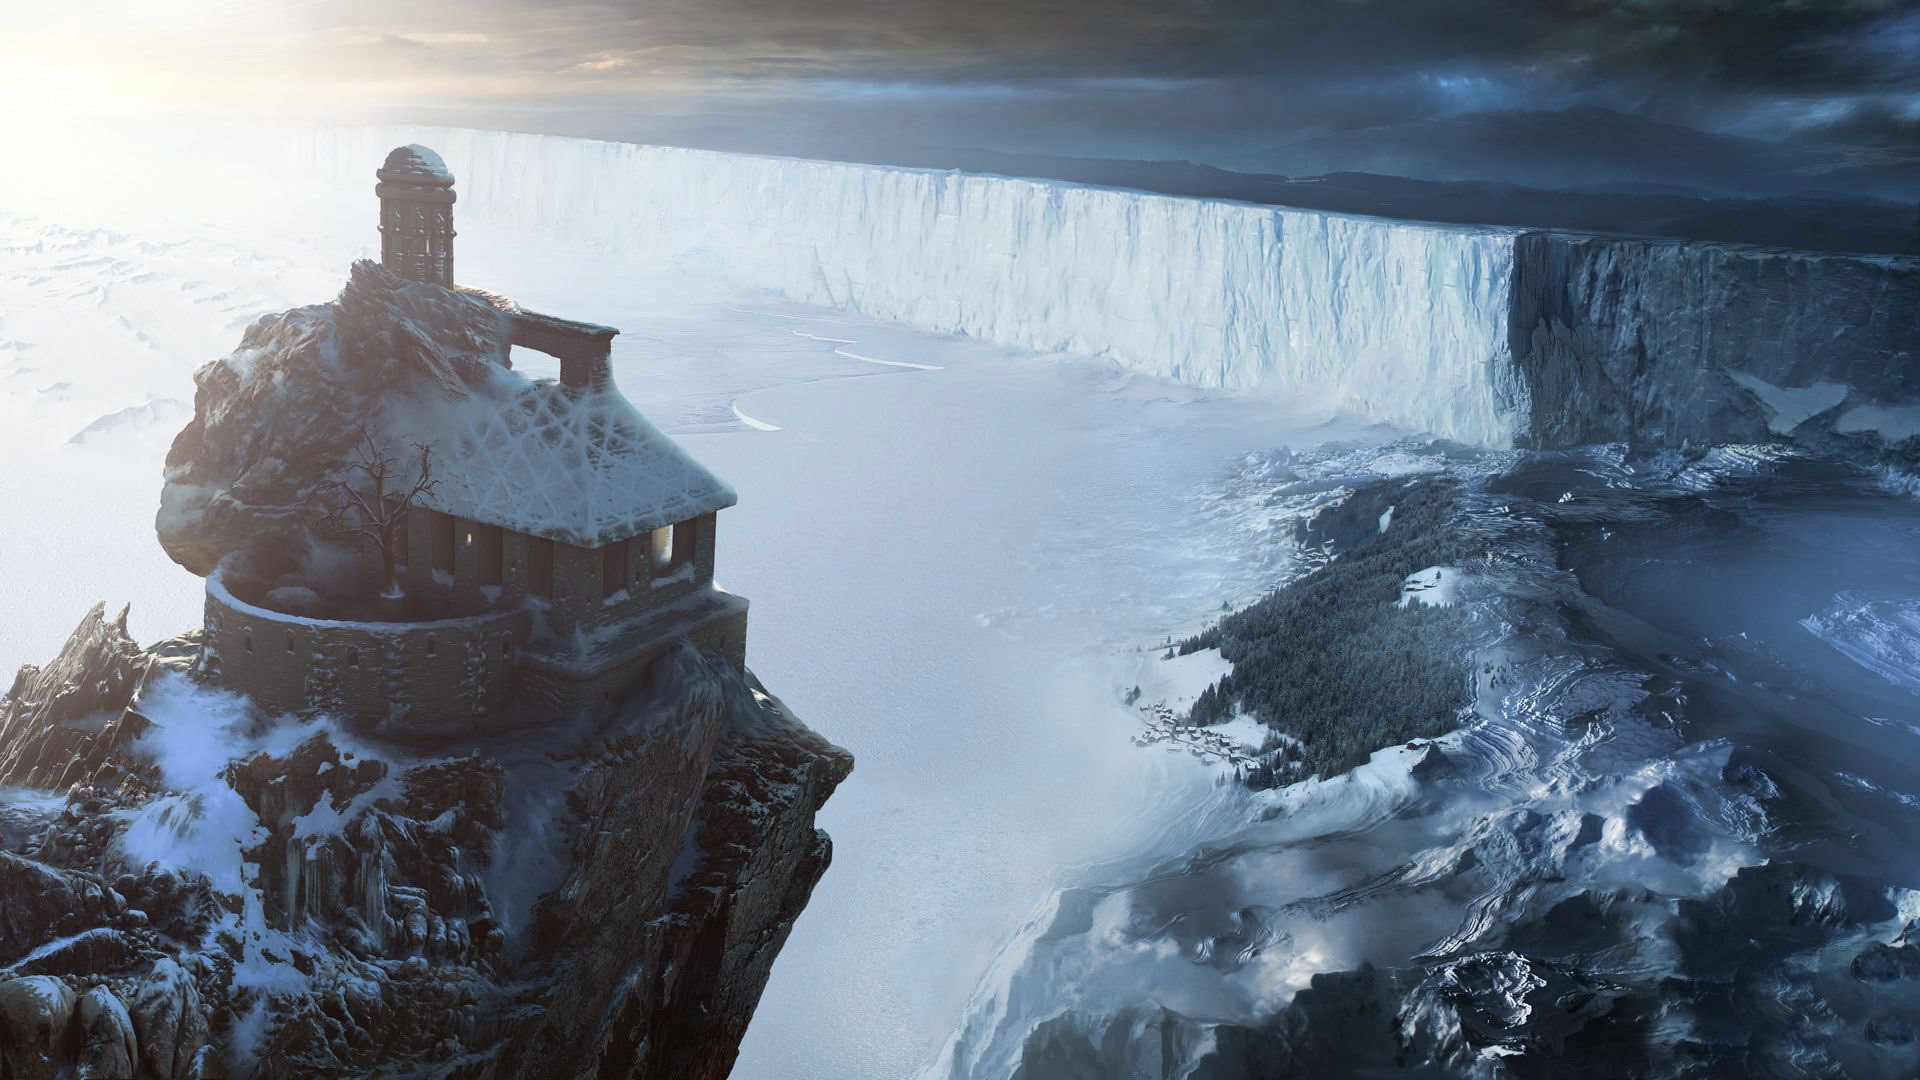 Game of Thrones wallpaper 1920x1080 ·① Download free cool HD